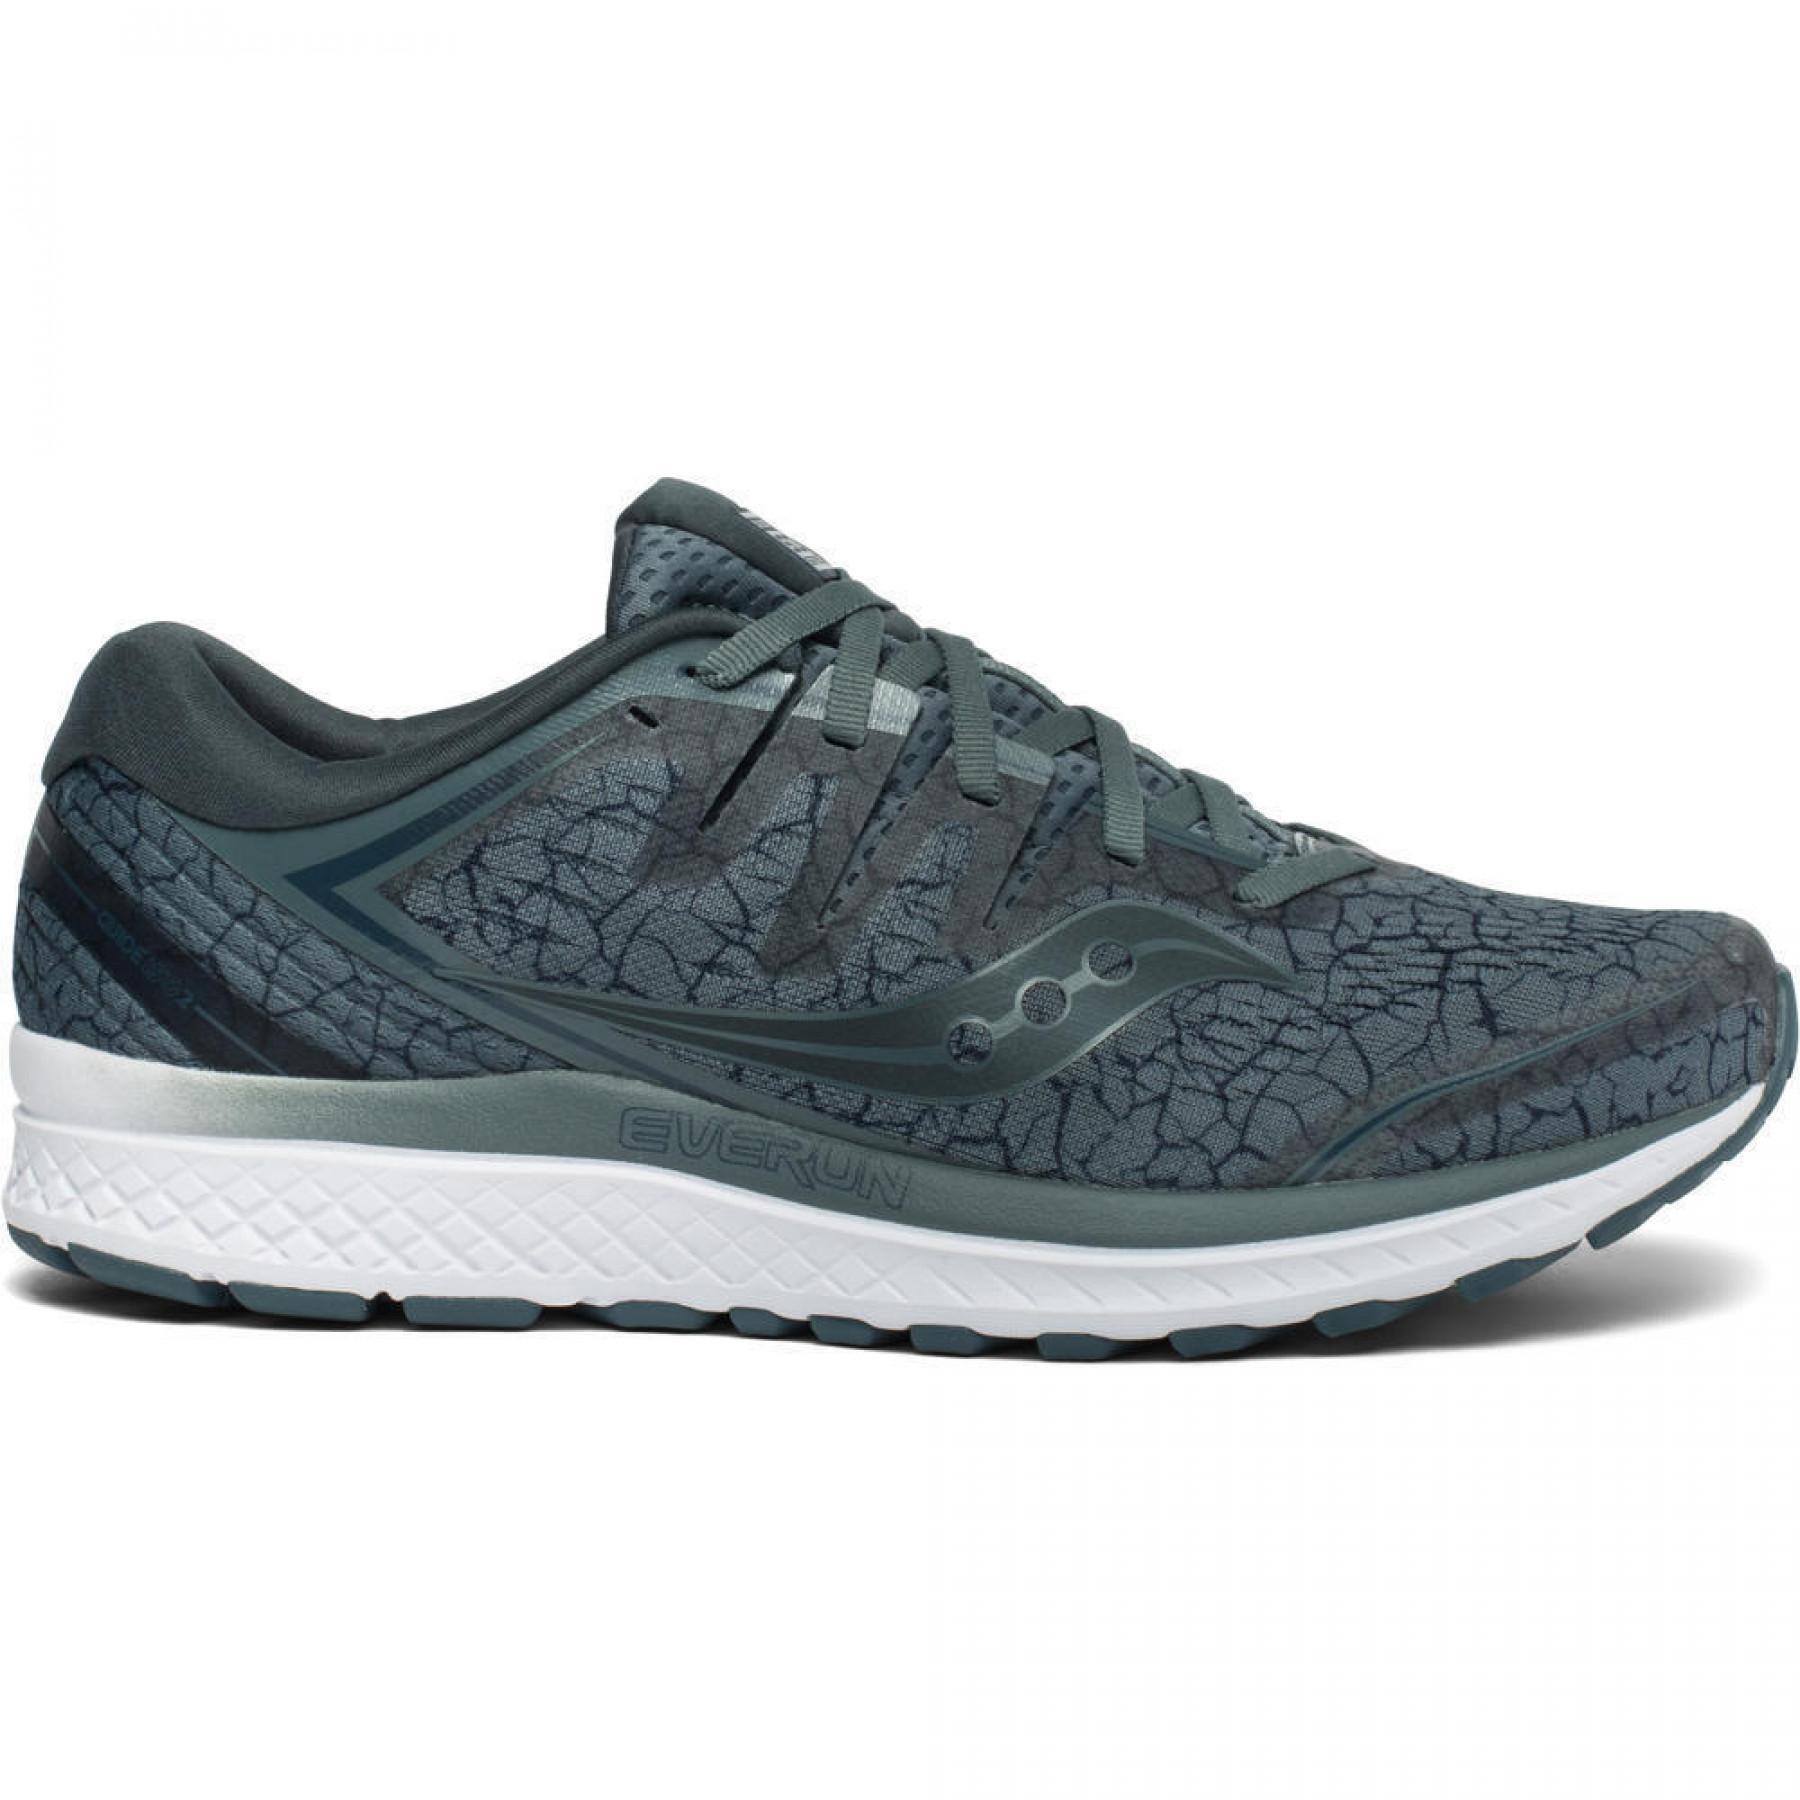 Chaussures de running Saucony Guide Iso 2